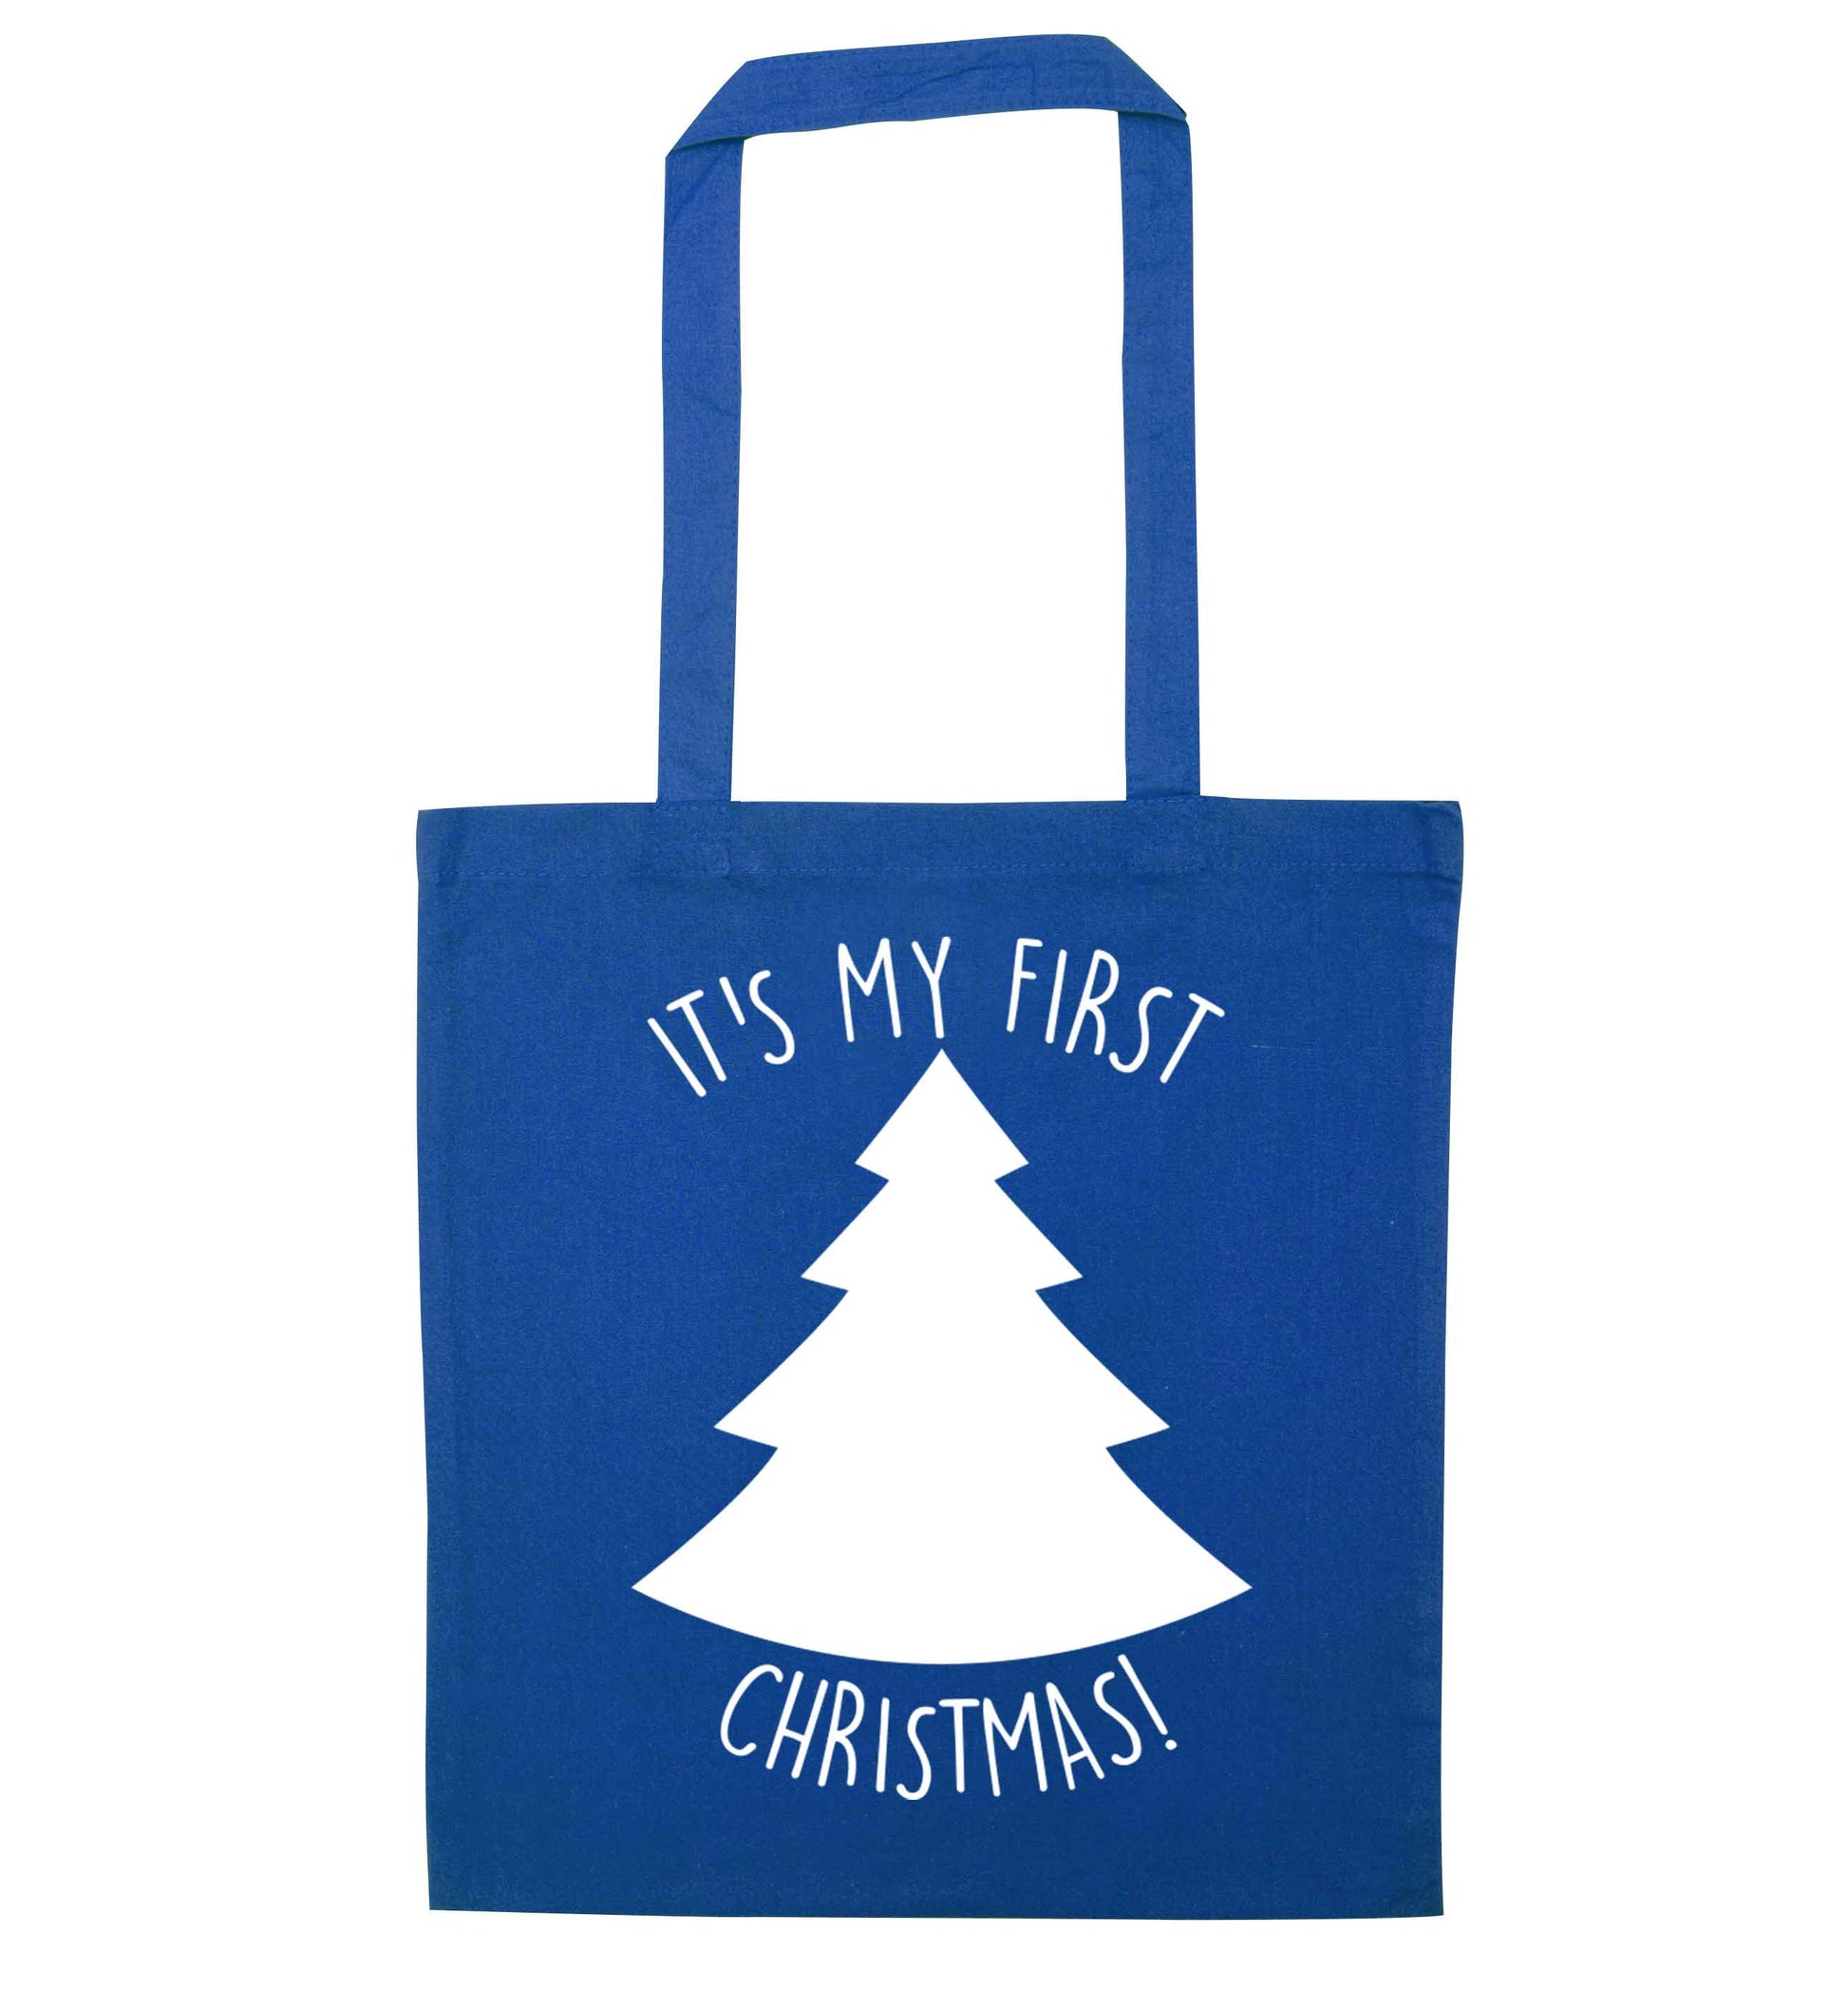 It's my first Christmas - tree blue tote bag